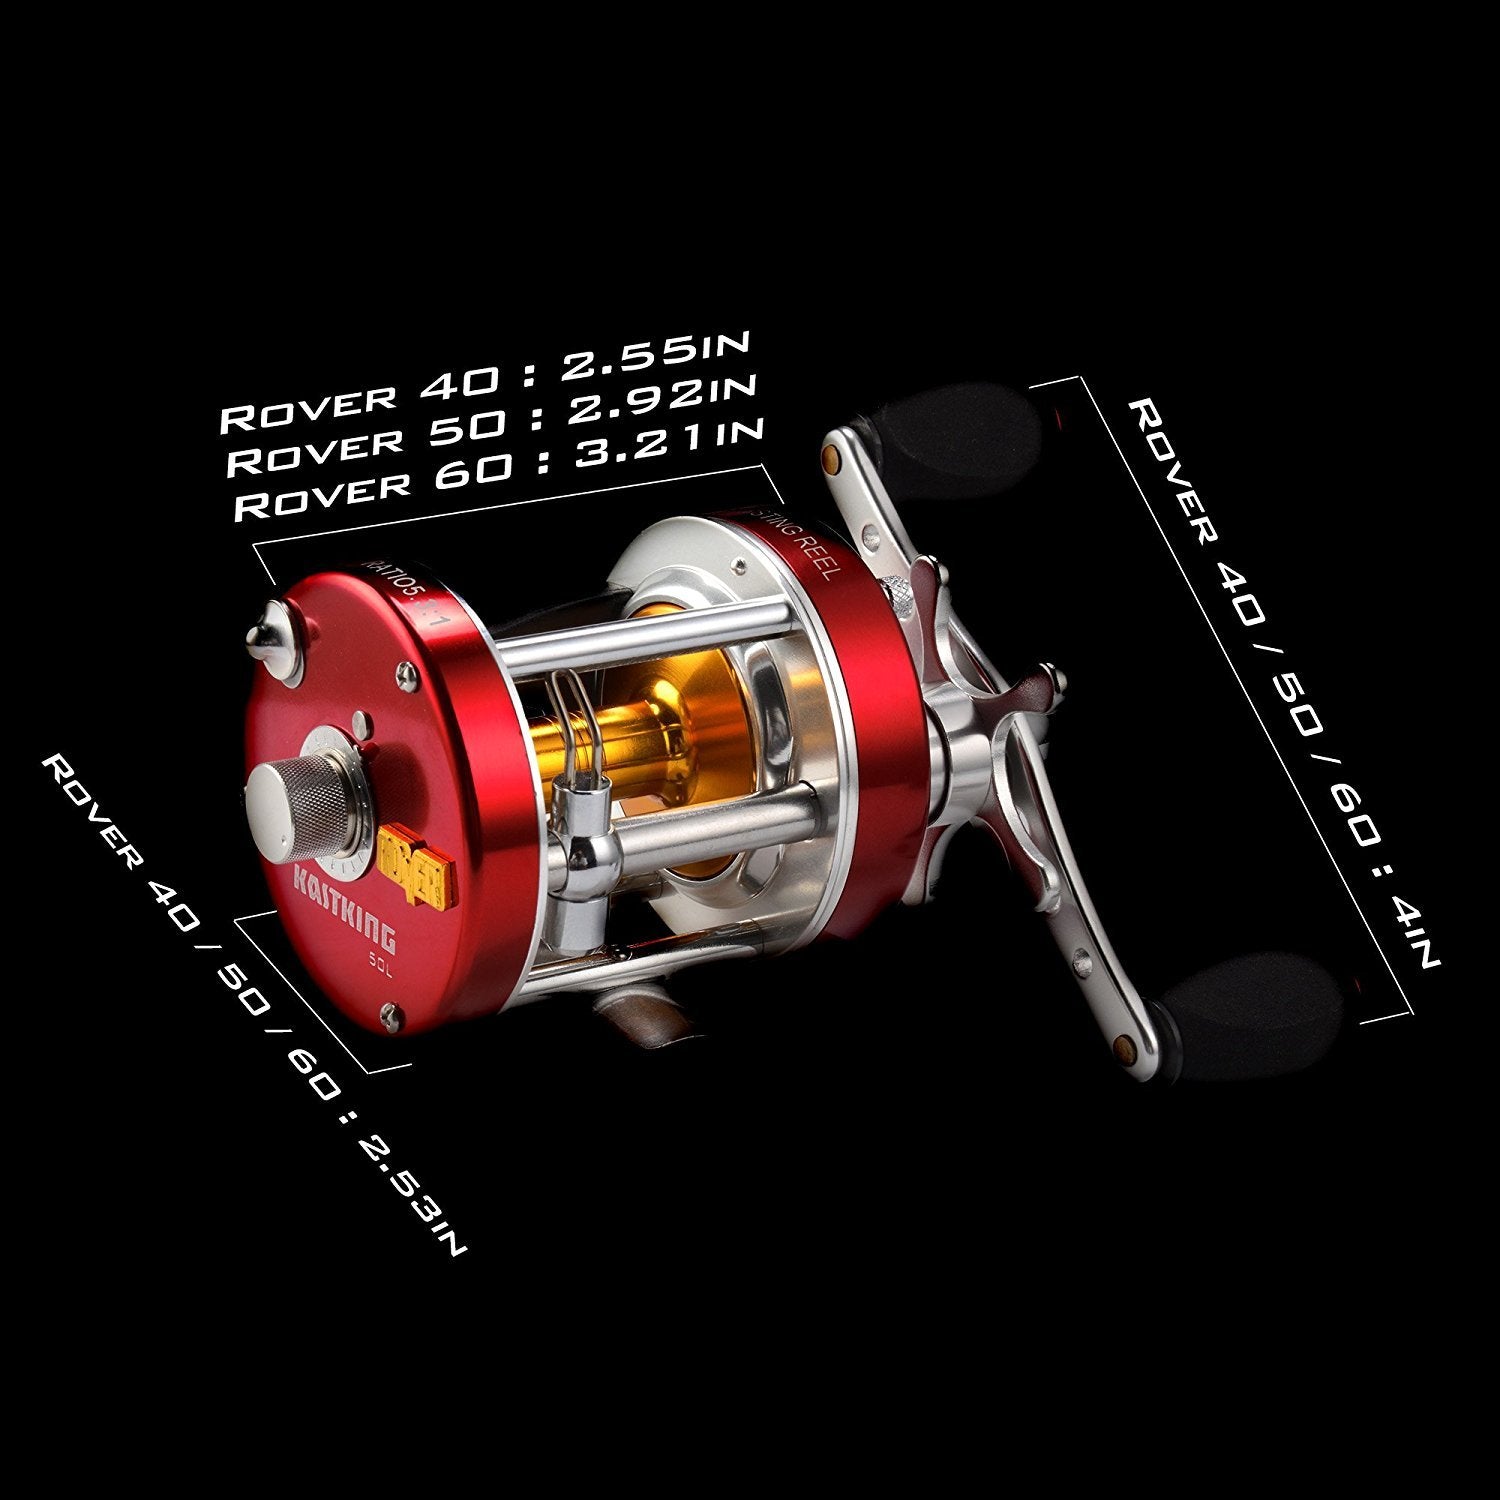 Back in Black! The KastKing Rover round baitcasting reel is better than  ever! With reinforced thicker hard anodized aluminum side plates